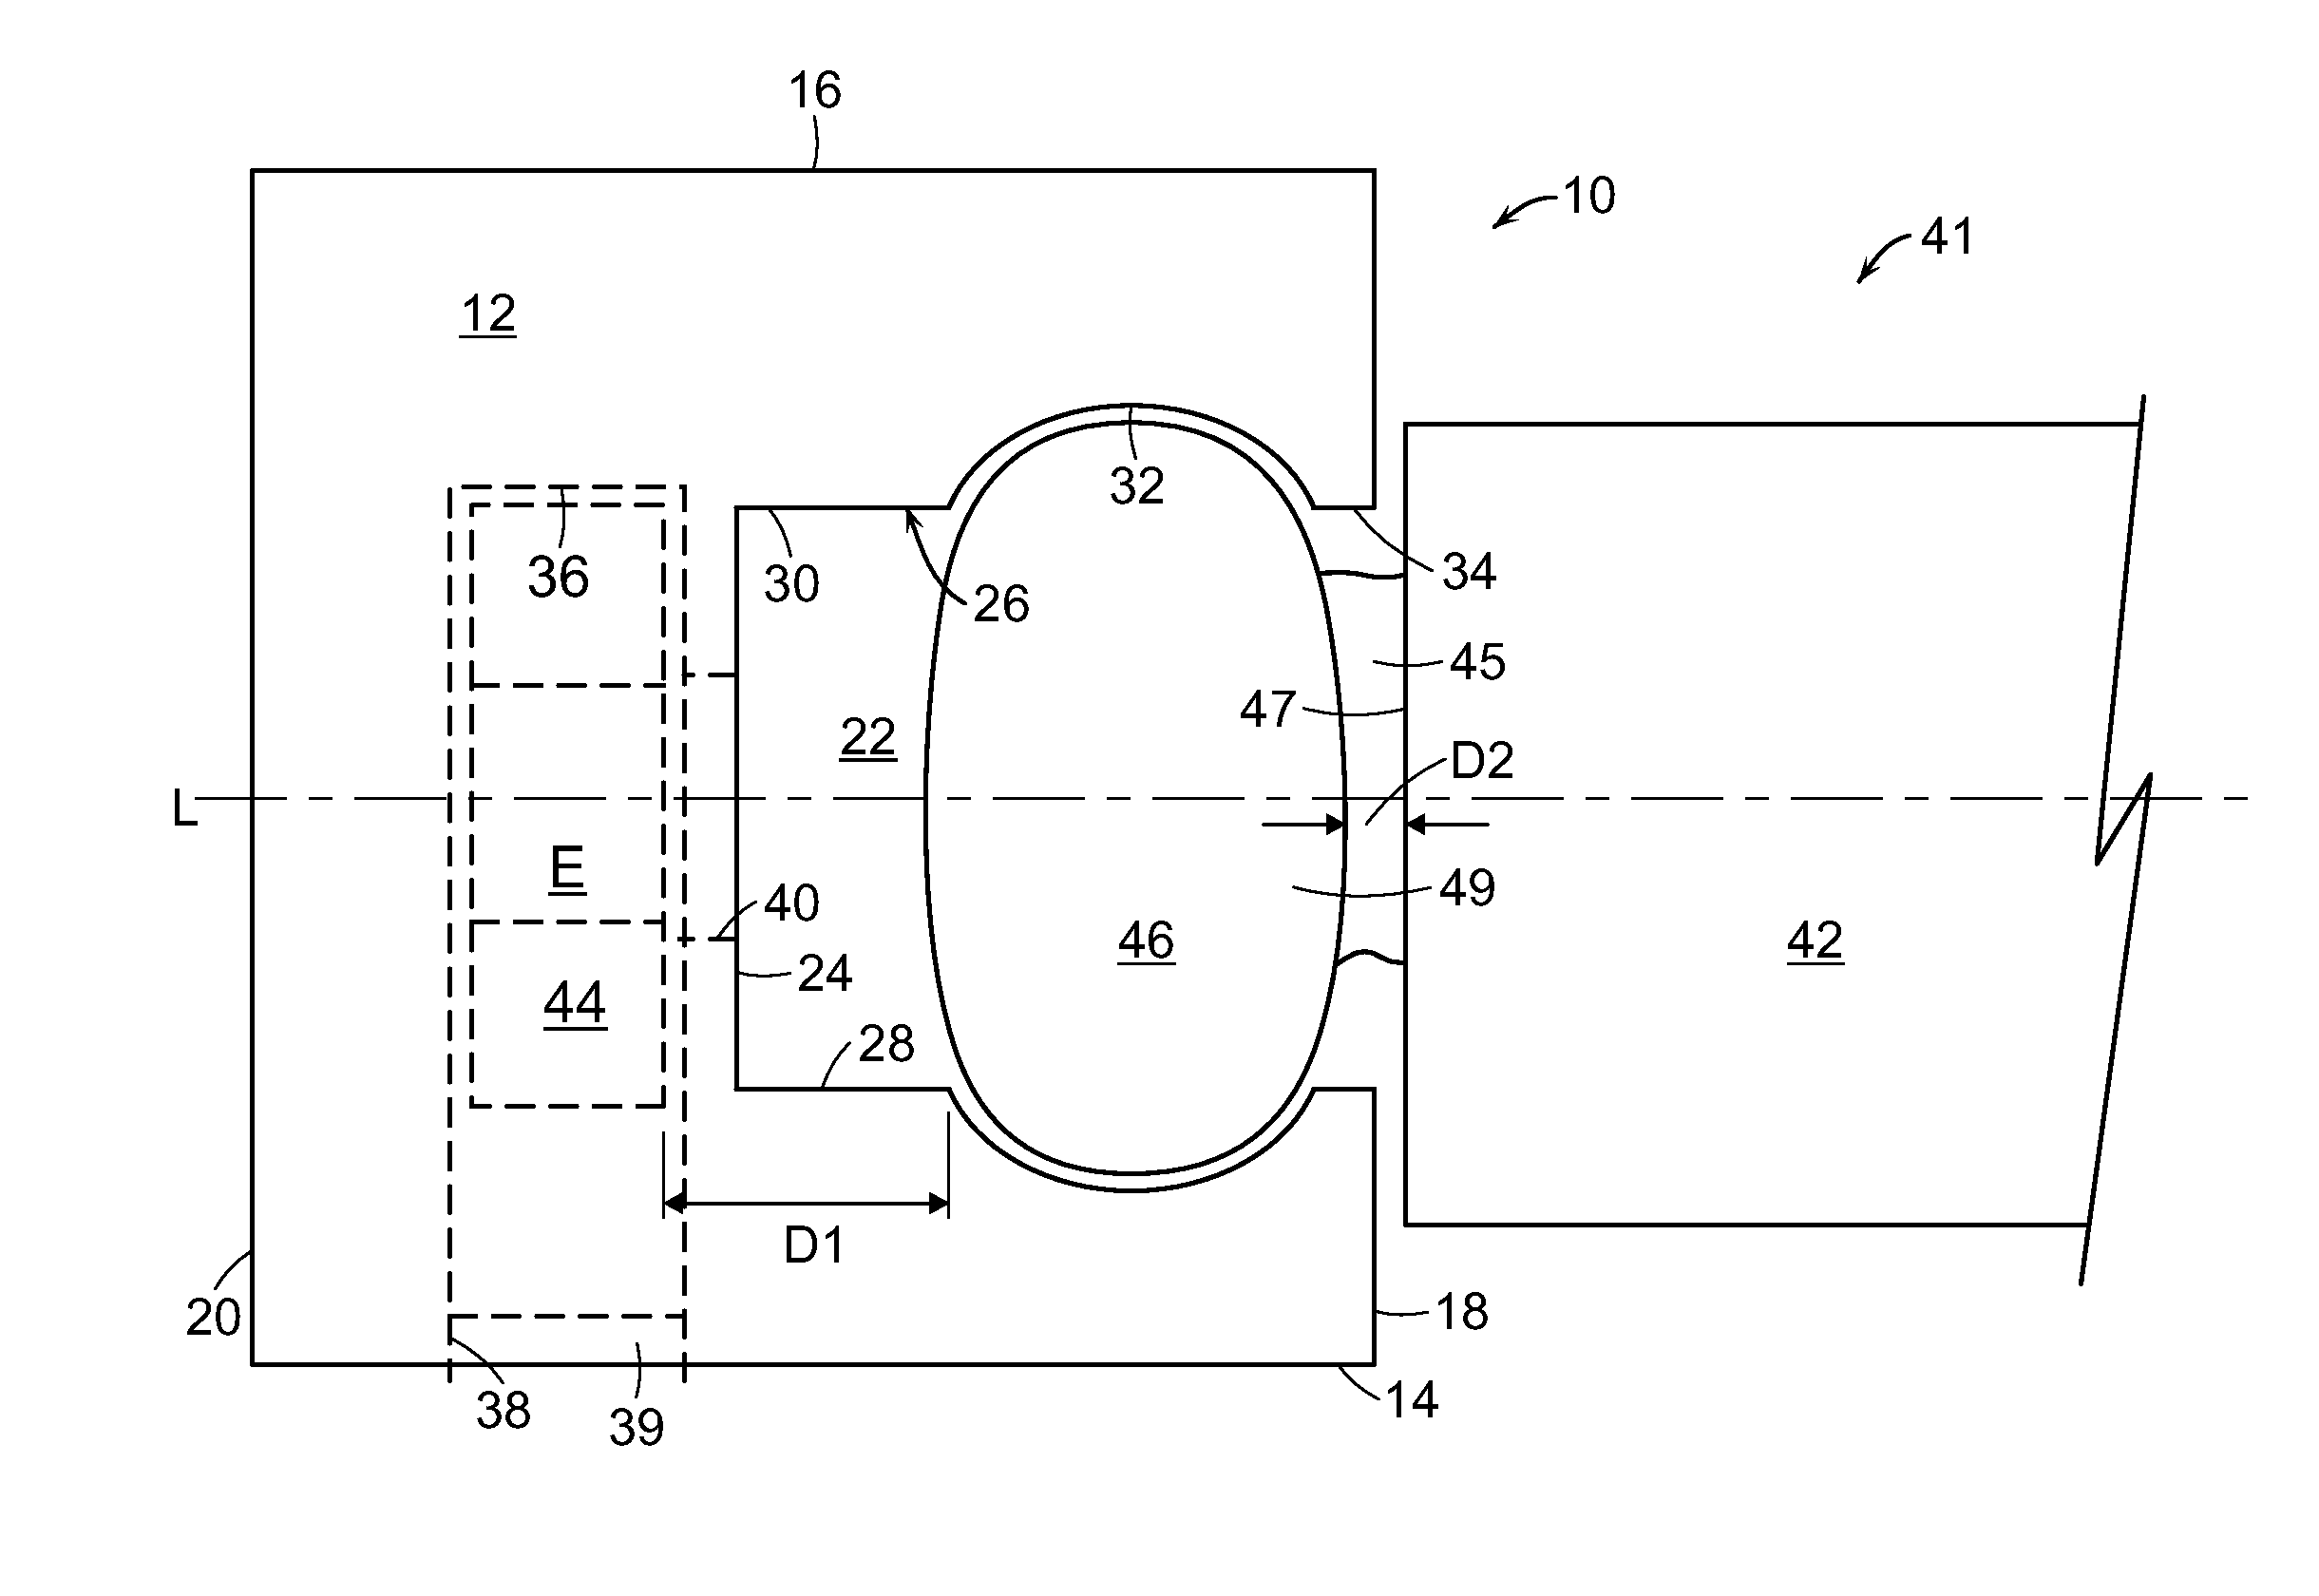 Light mixing chamber for use with color converting material and light guide plate and assembly